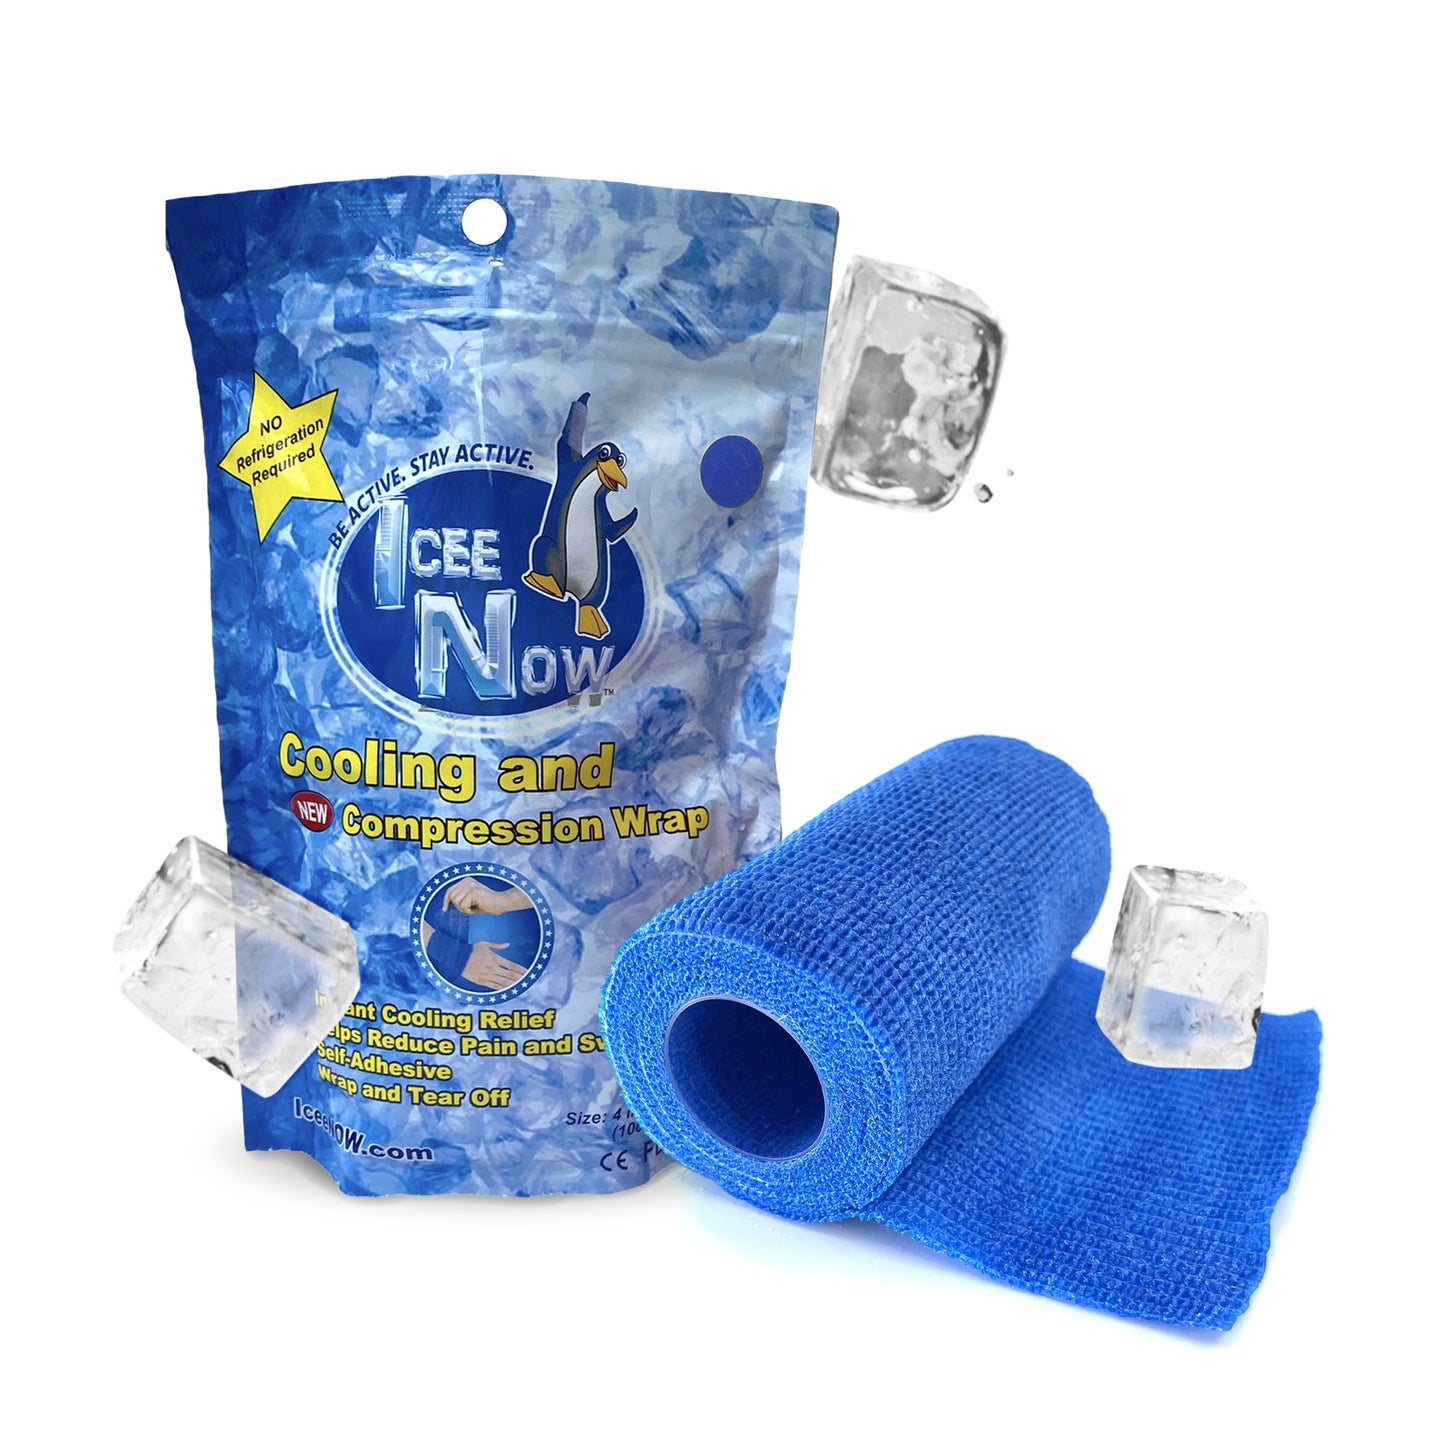 Icee Tape! Cooling and Compression. 8ct Display Box.